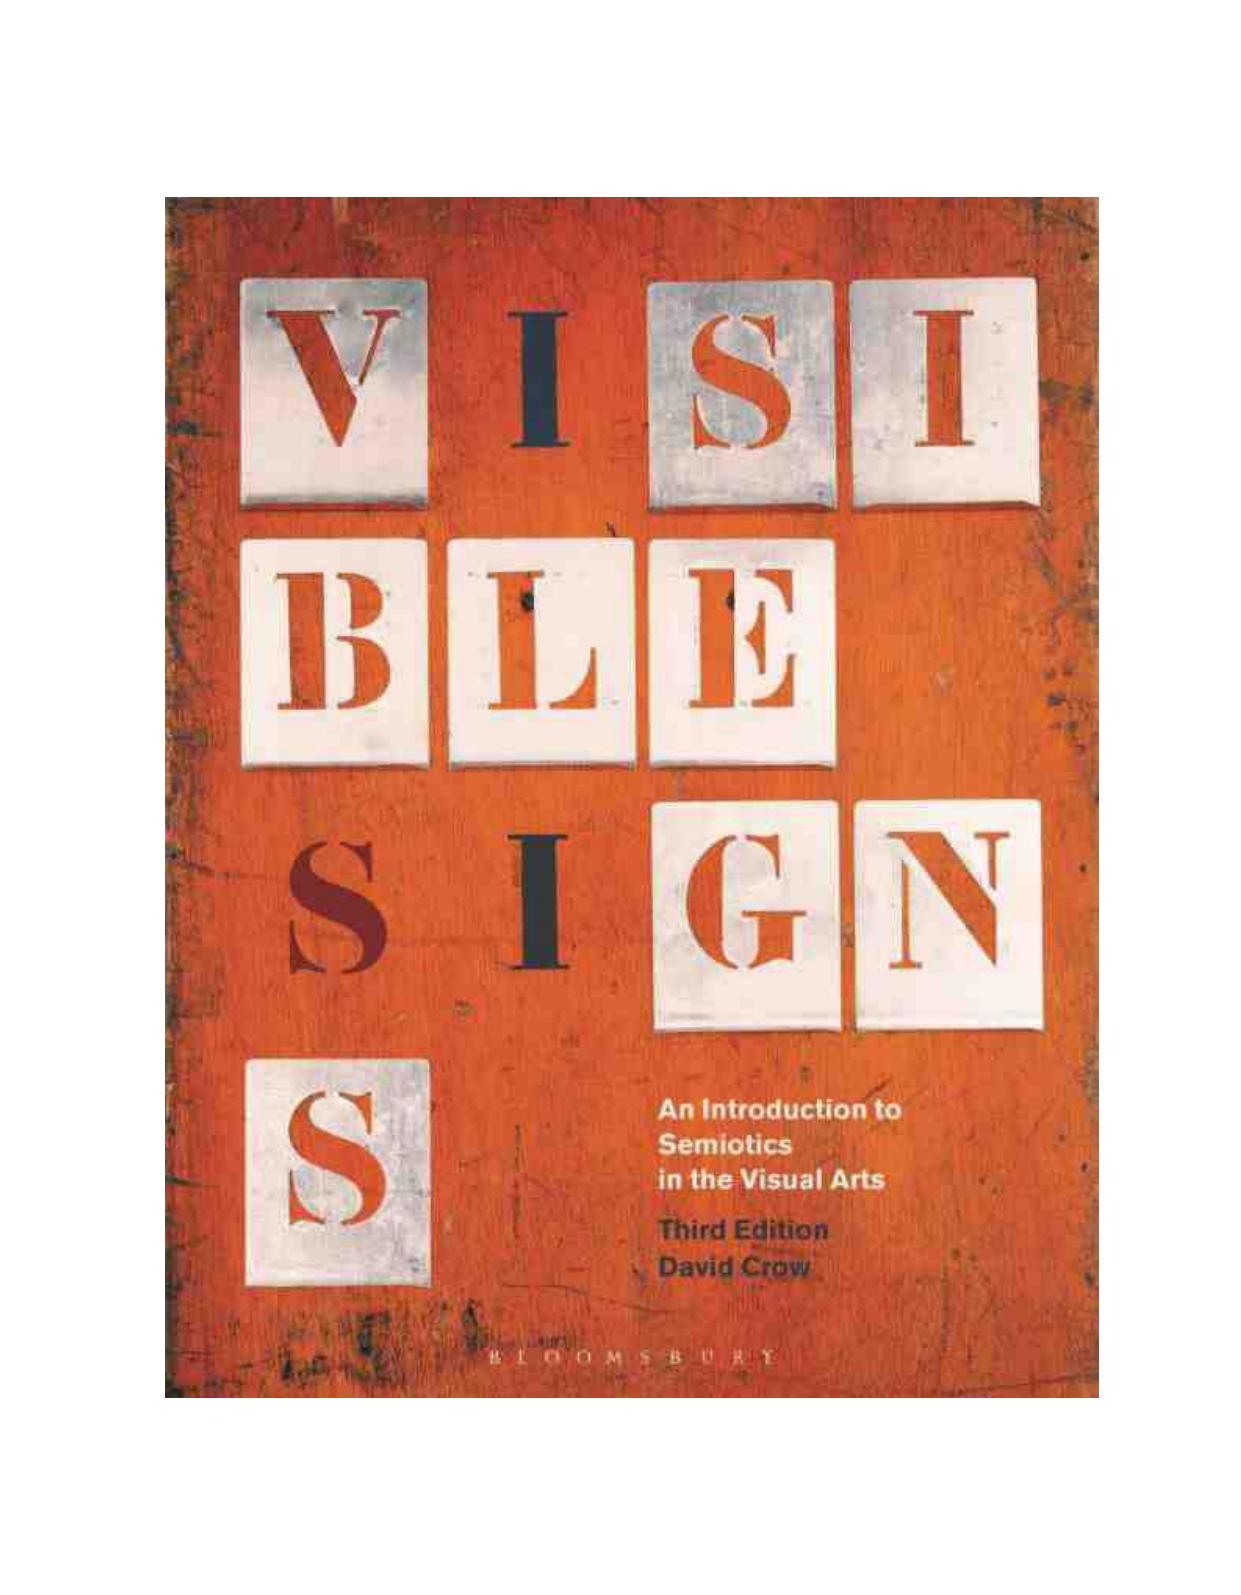 (eBook PDF)Visible Signs: An Introduction to Semiotics in the Visual Arts by David Crow